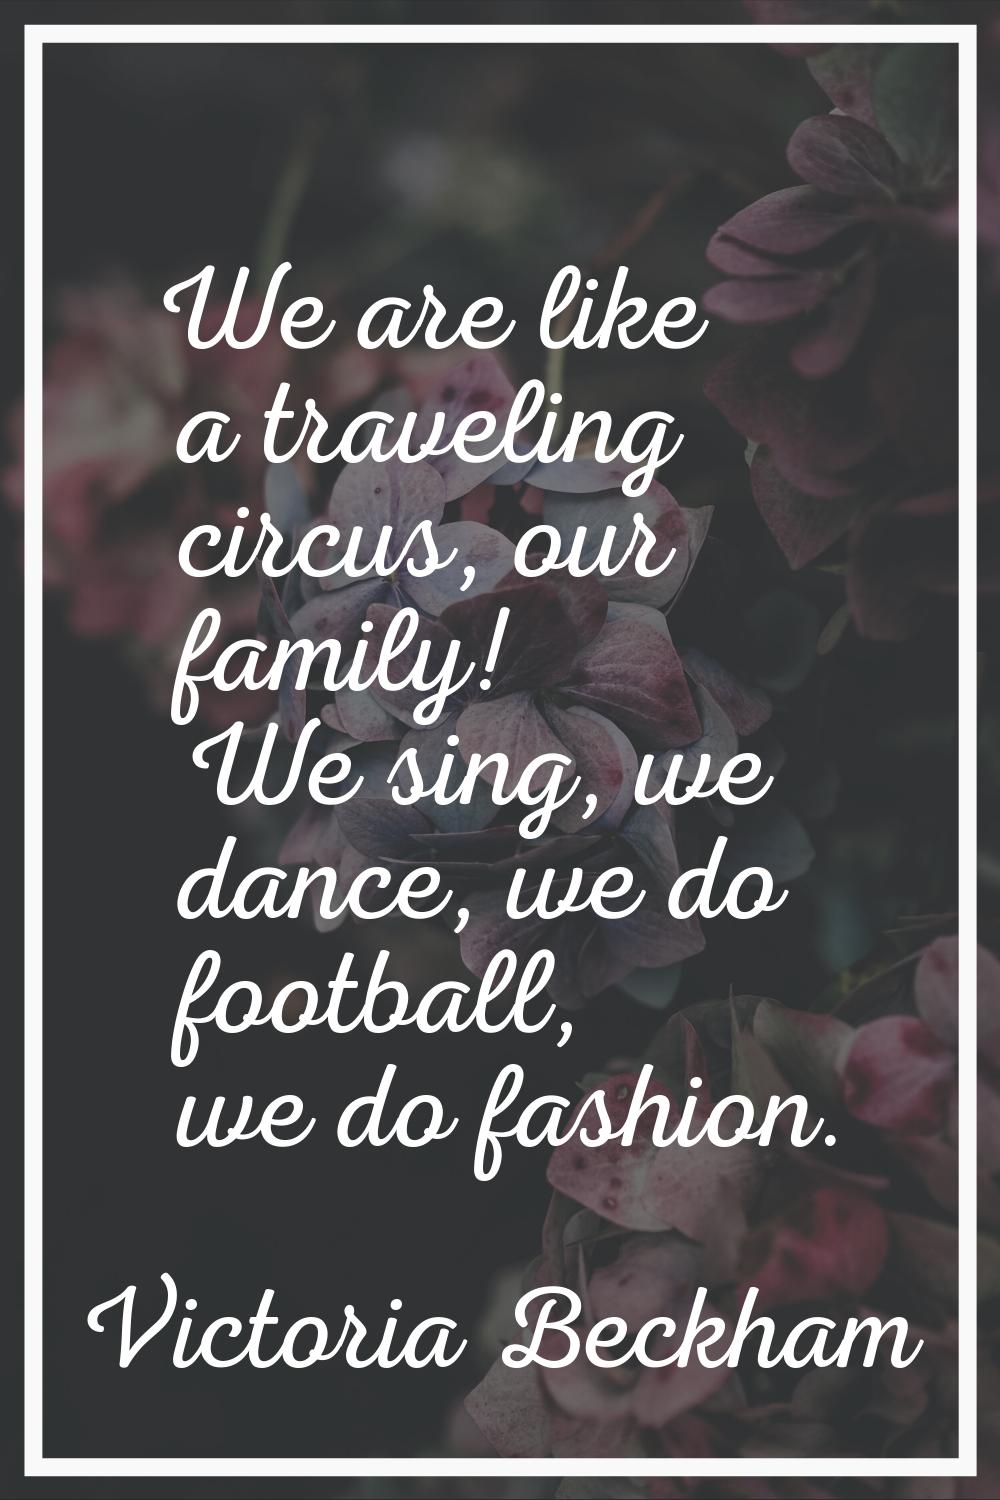 We are like a traveling circus, our family! We sing, we dance, we do football, we do fashion.